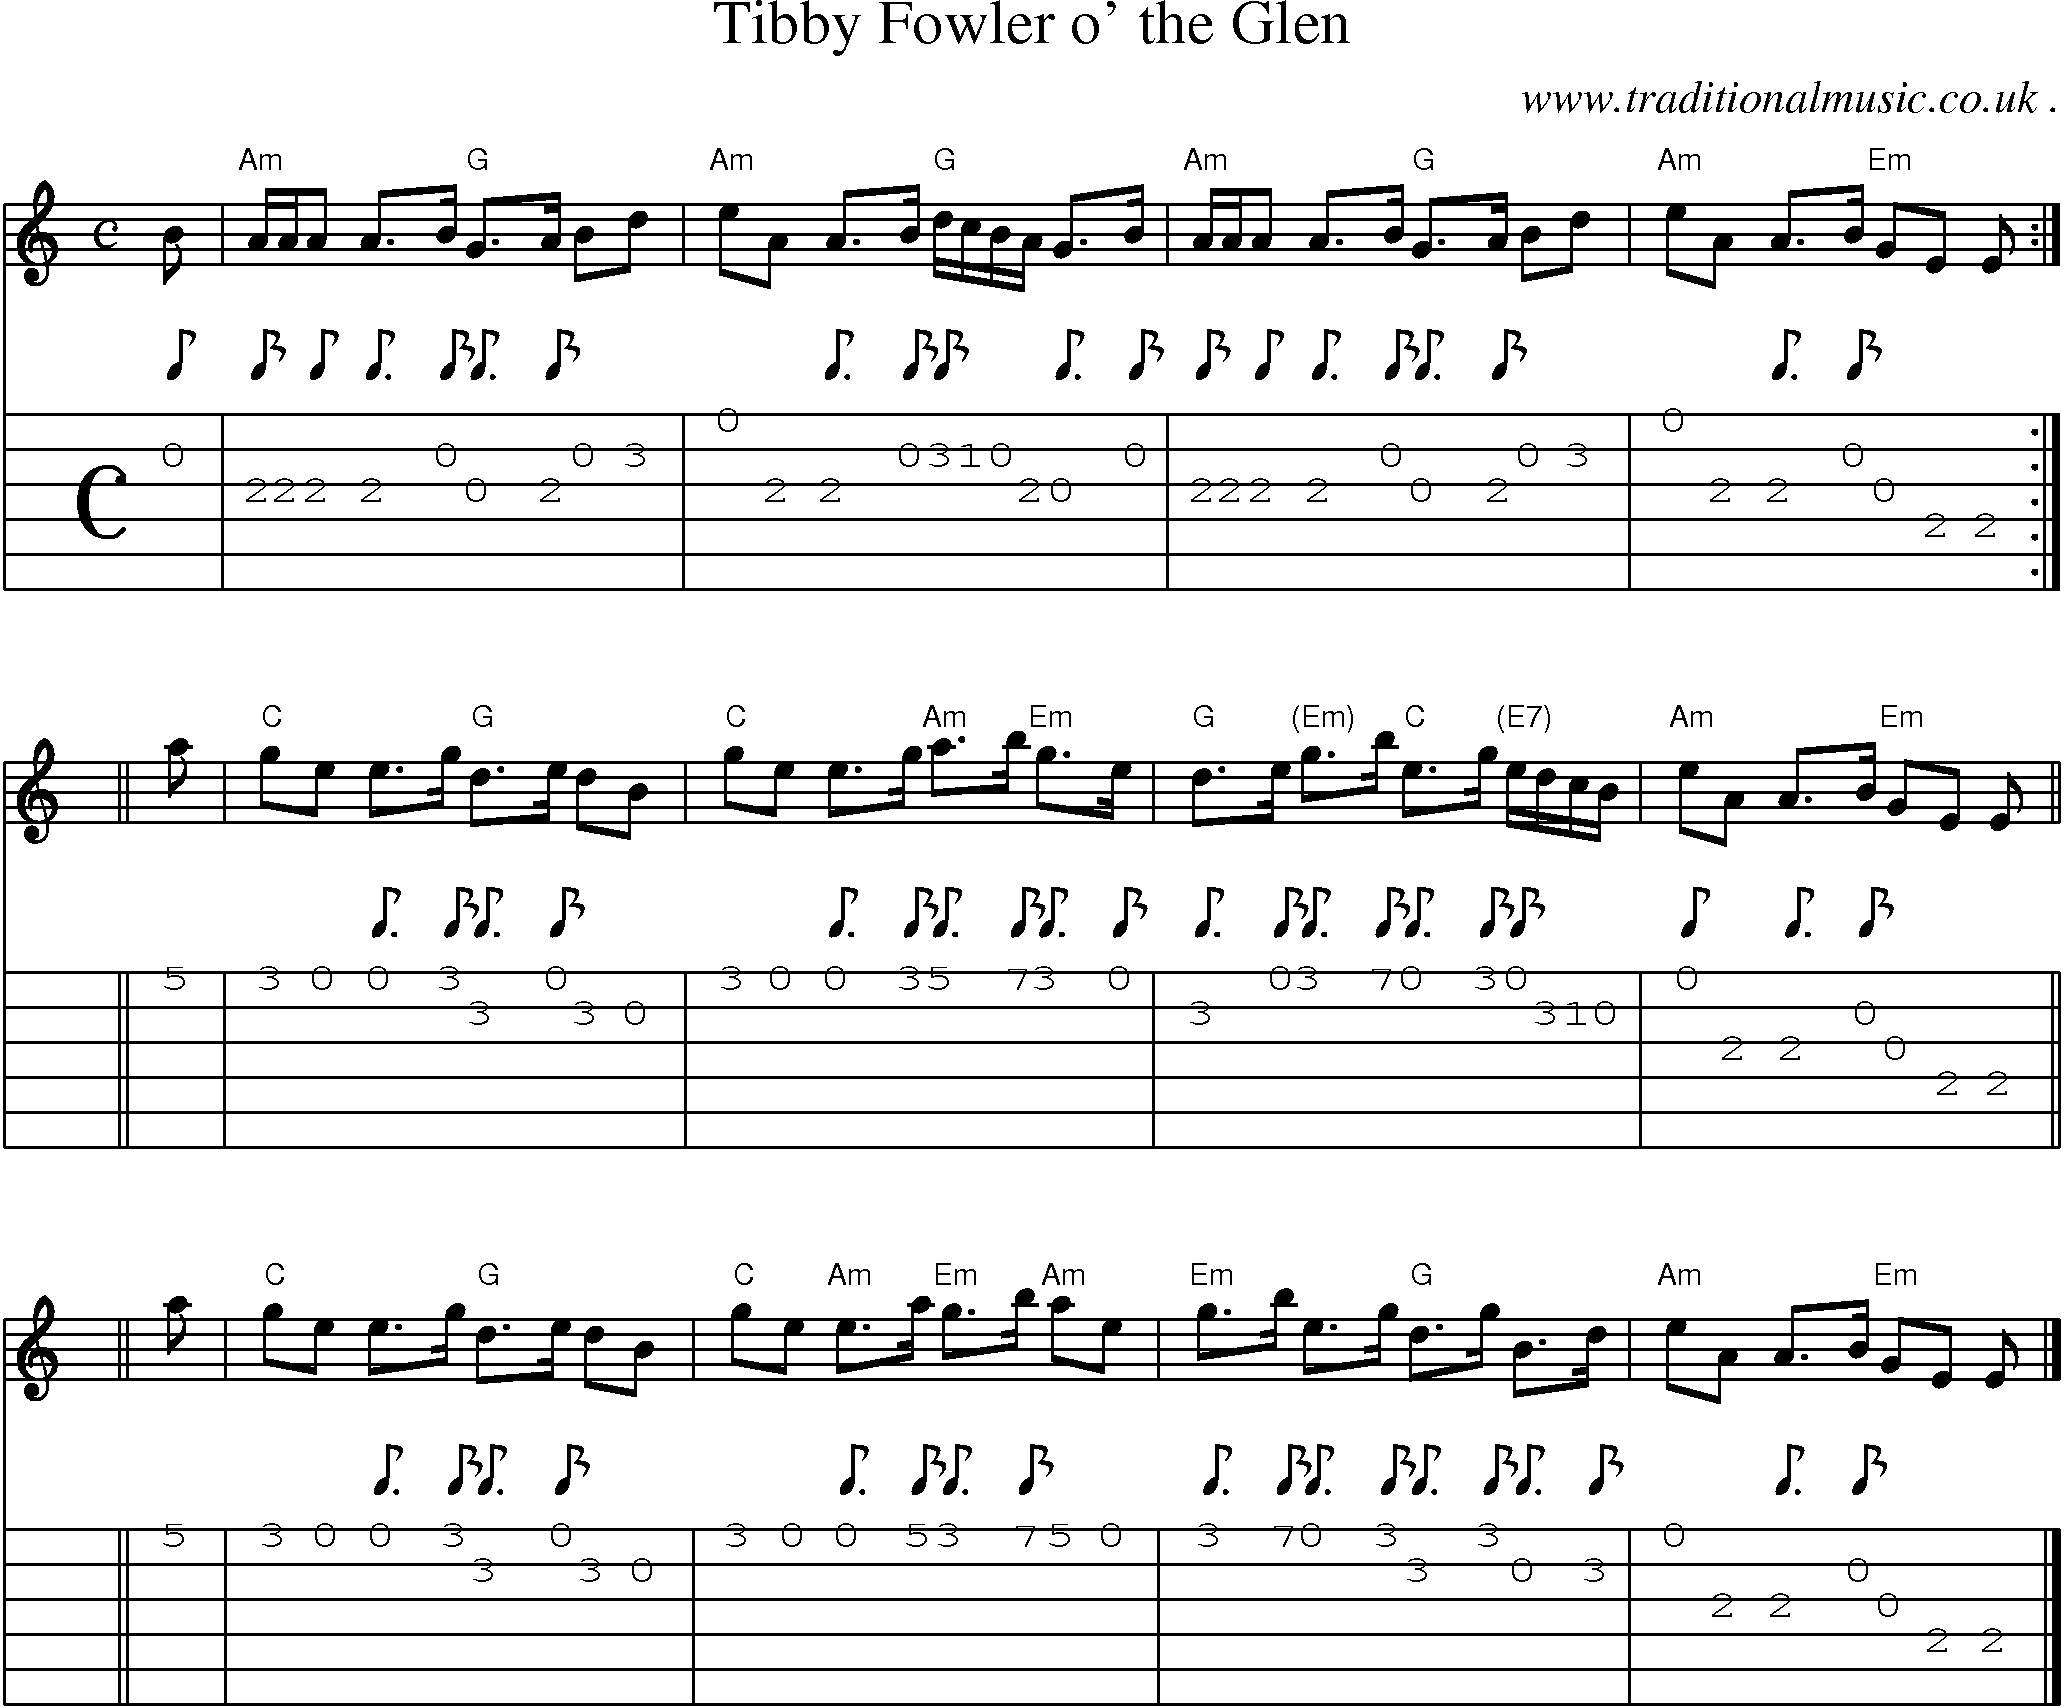 Sheet-music  score, Chords and Guitar Tabs for Tibby Fowler O The Glen